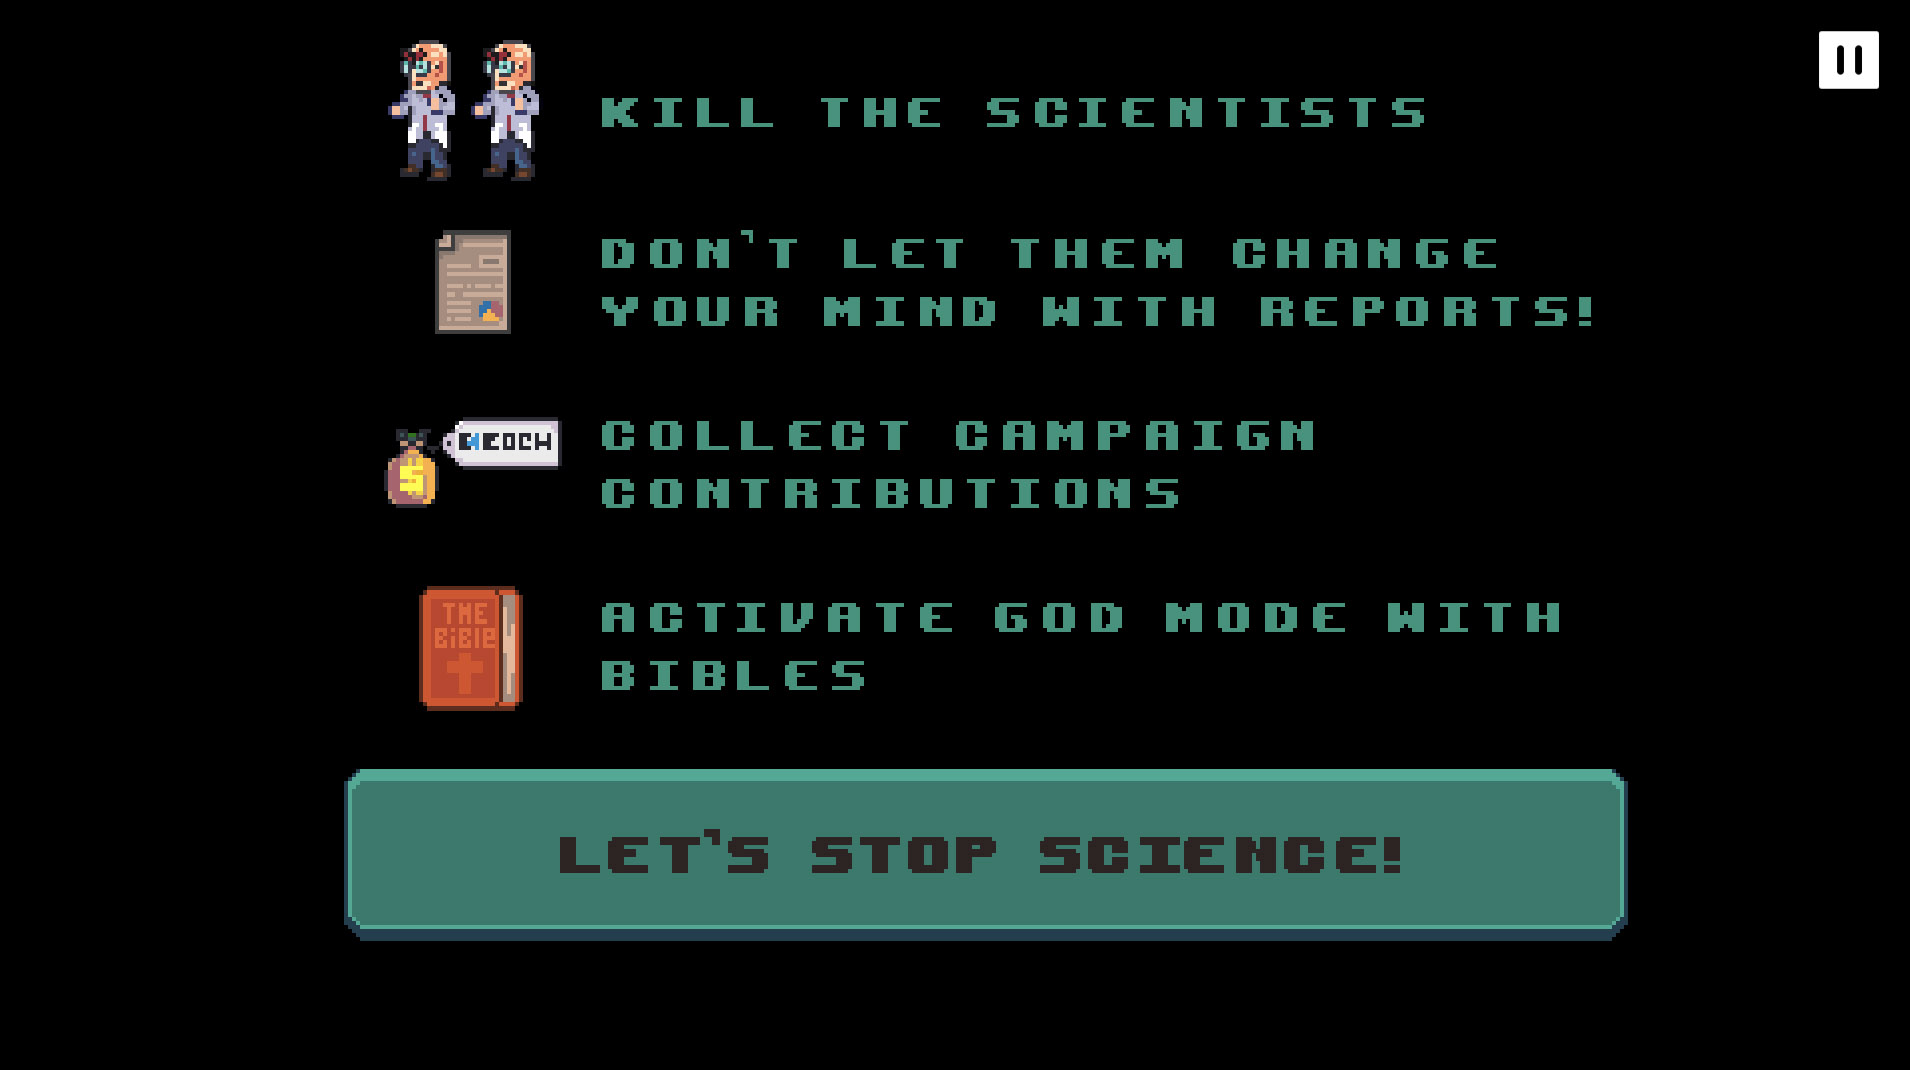 Eradicate scientists to win campaign collections 